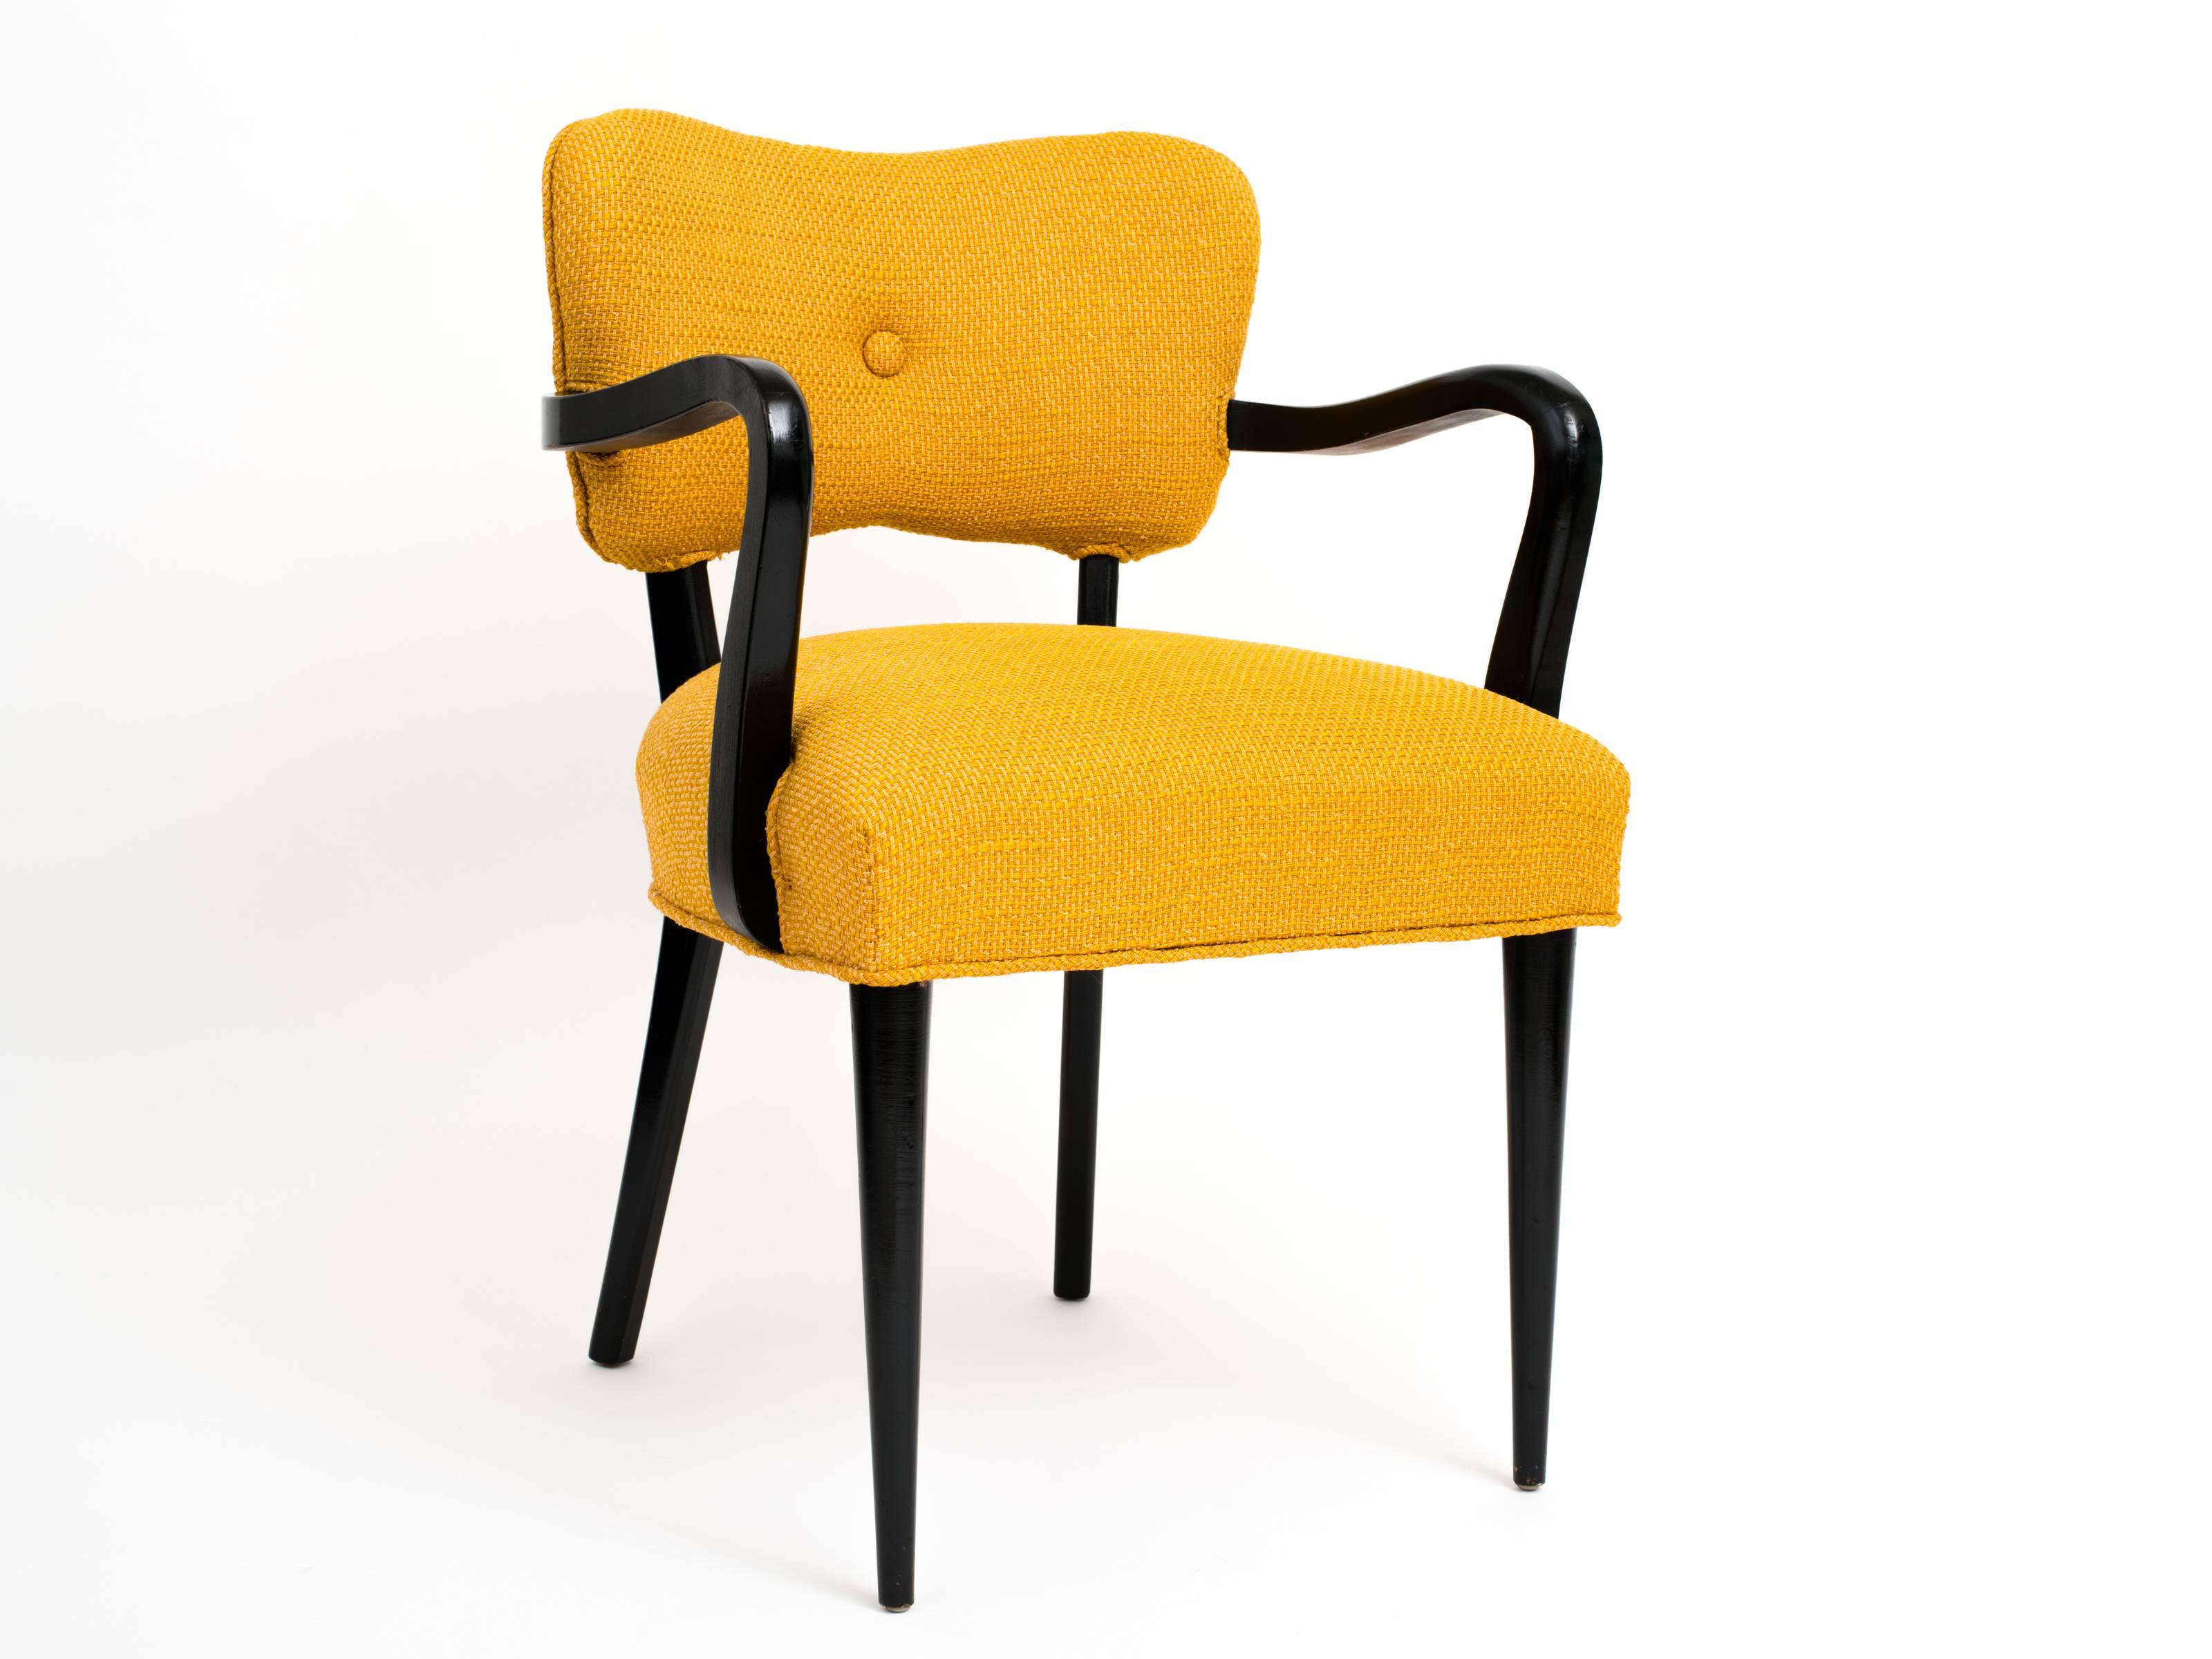 A timeless and well-built pair of modernist side chairs with ebonized, solid wood frames and with their original, creamsicle-colored wool upholstery. Rounded and tapered front legs against square rear legs, all being slightly flared which nicely